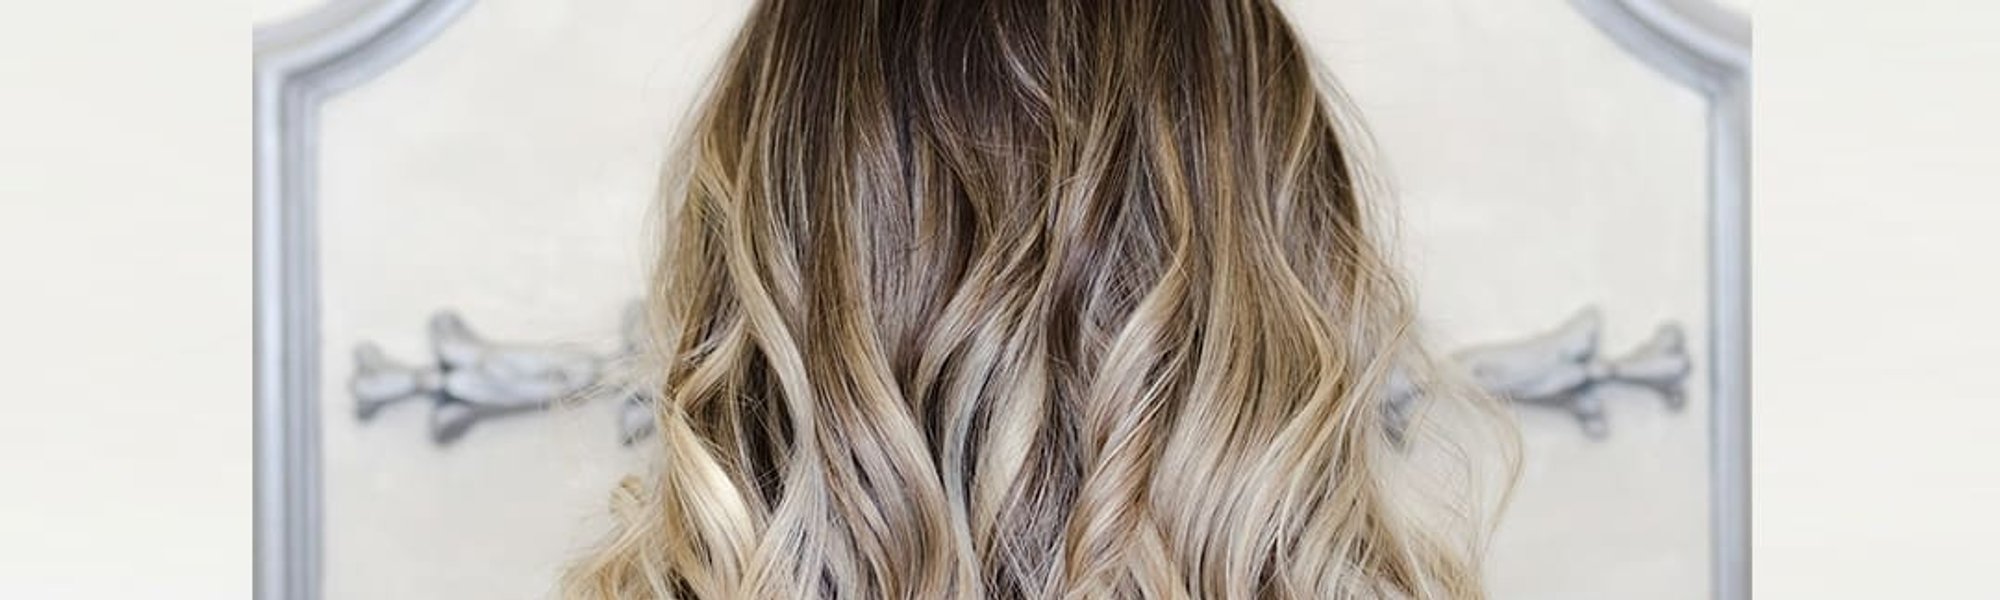 How To Take Care Of Ombre Hair 1080x476